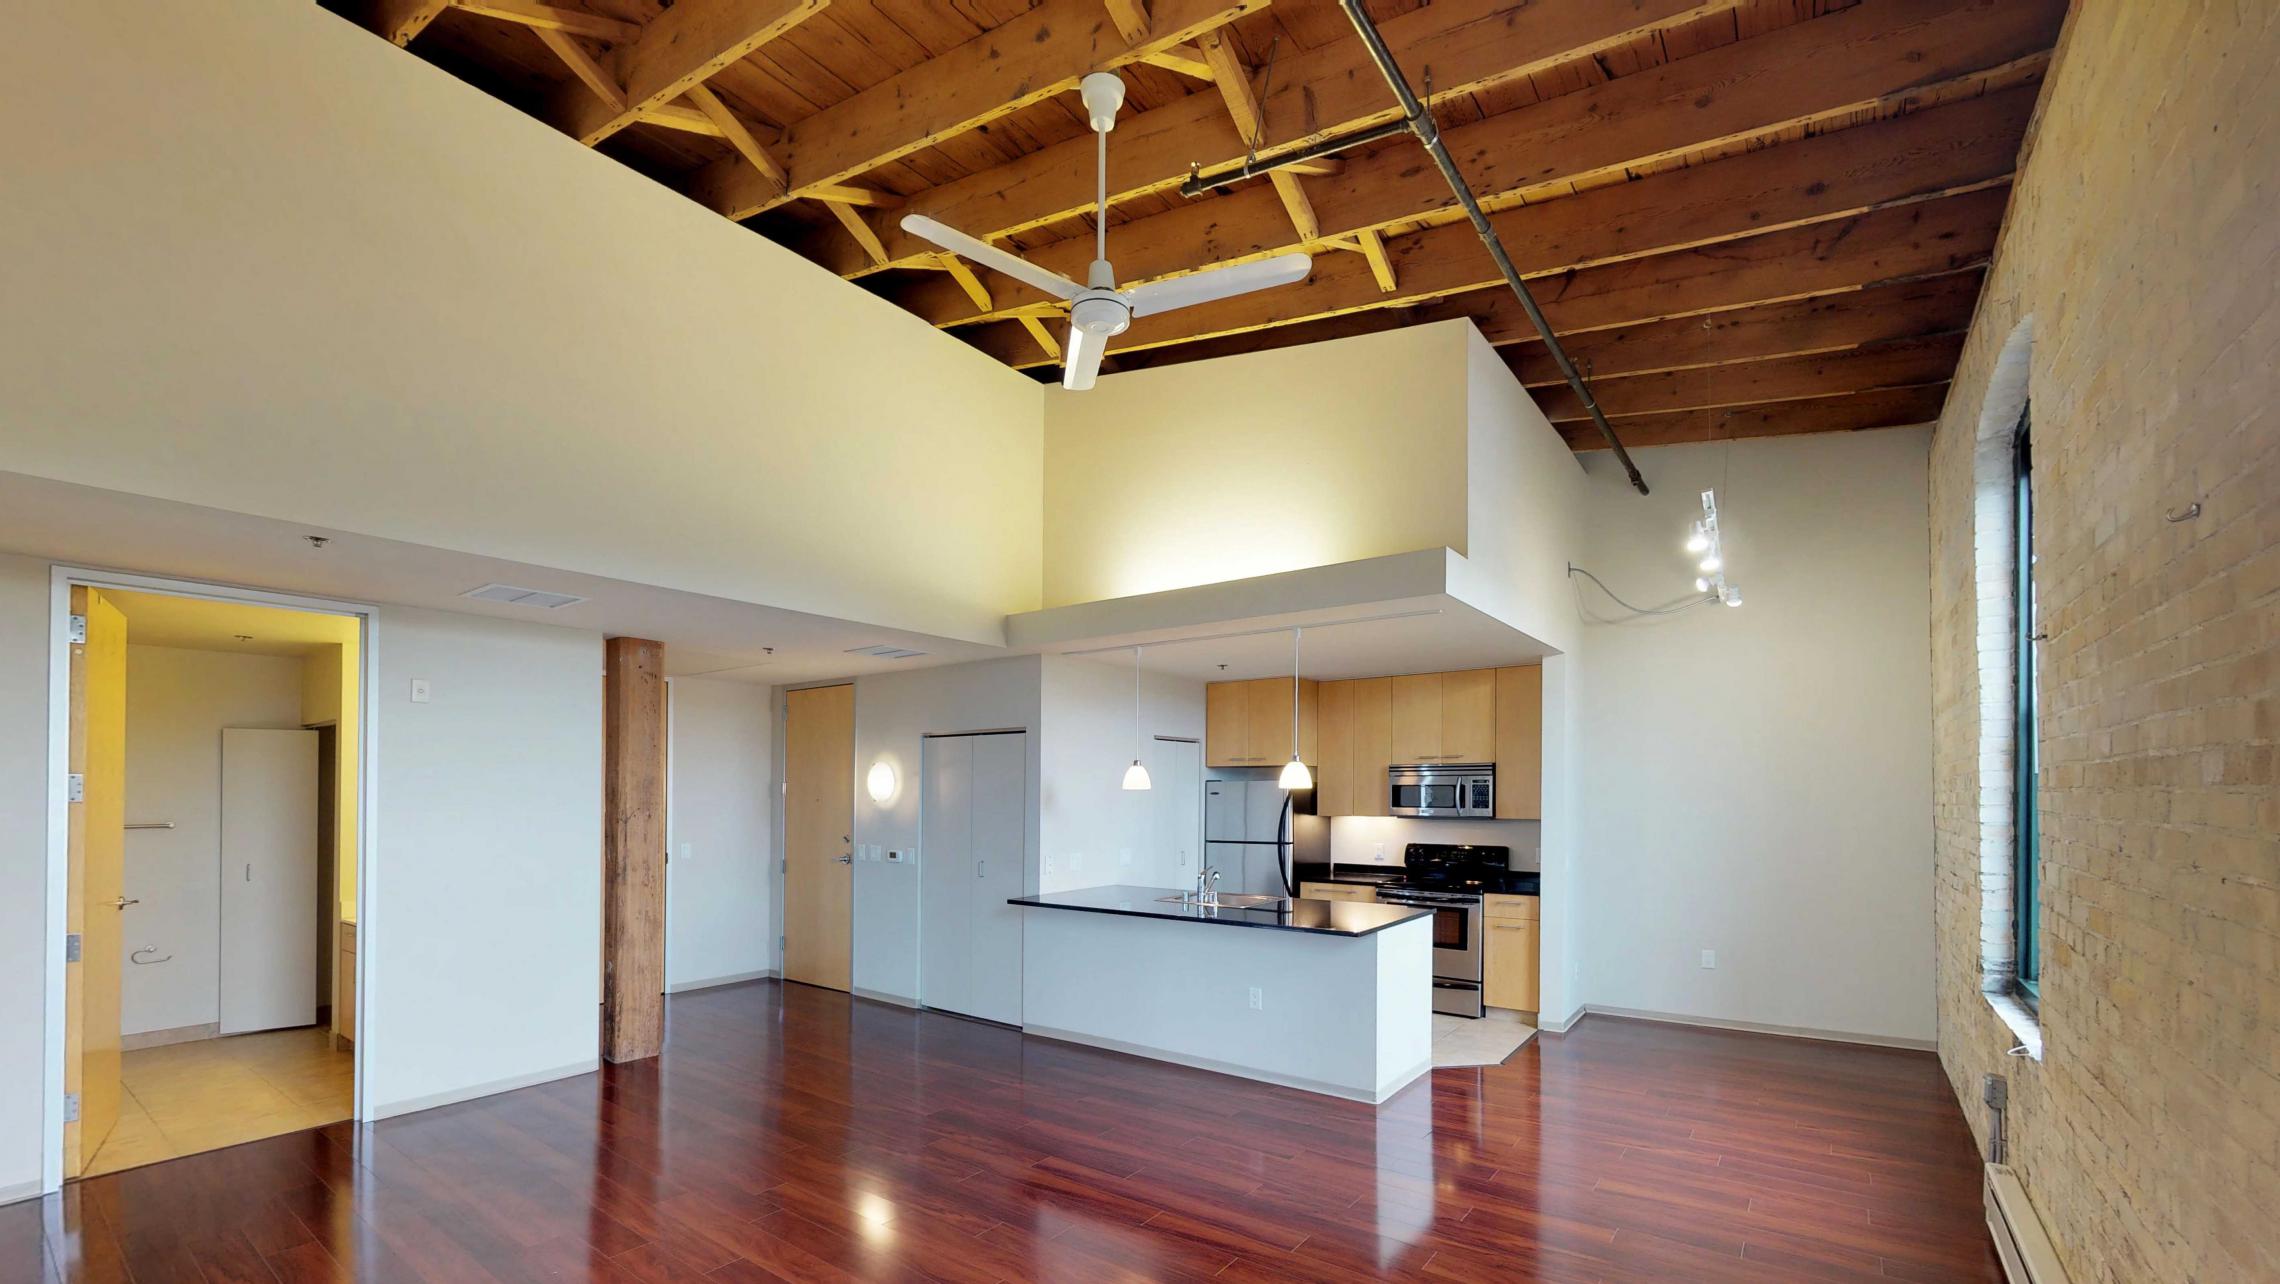 Tobacco-Lofts-Two-Bedroom-Apartment-E312-Historic-Downtown-Madison-Living-Room-Kitchen-Design-Yards